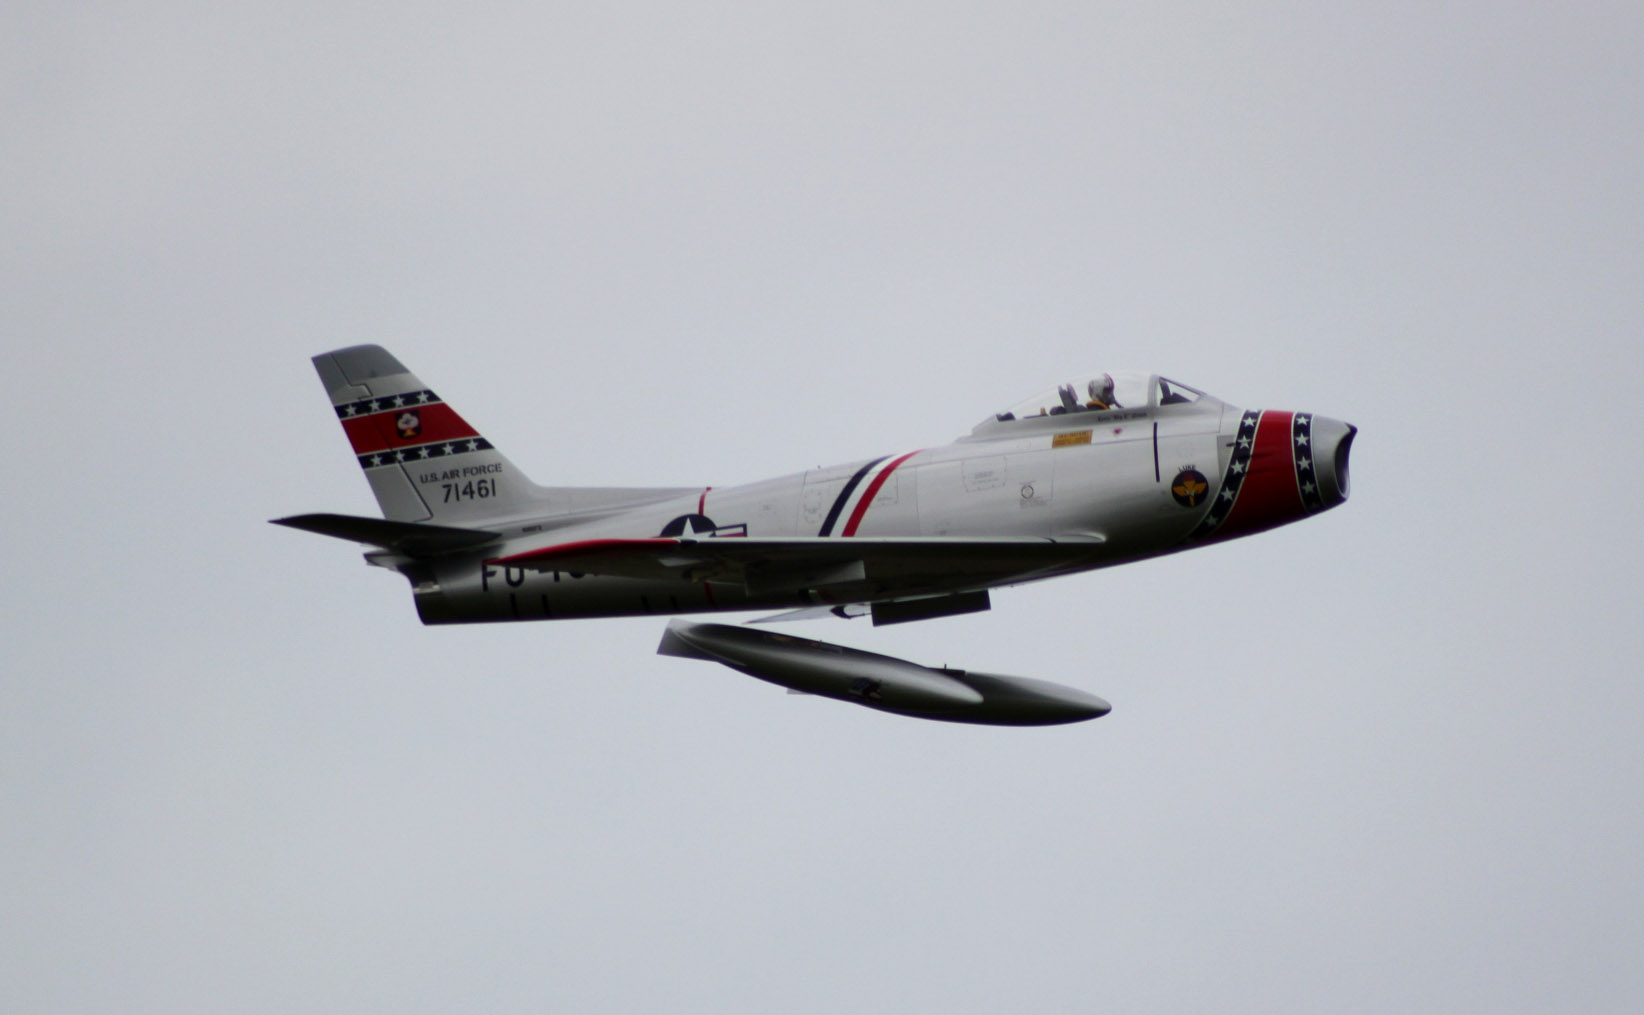 Terry Nitsch BVM F-86 will show how it done at 2011 AMA Scale Aerobatic Nats June 27-30 2011